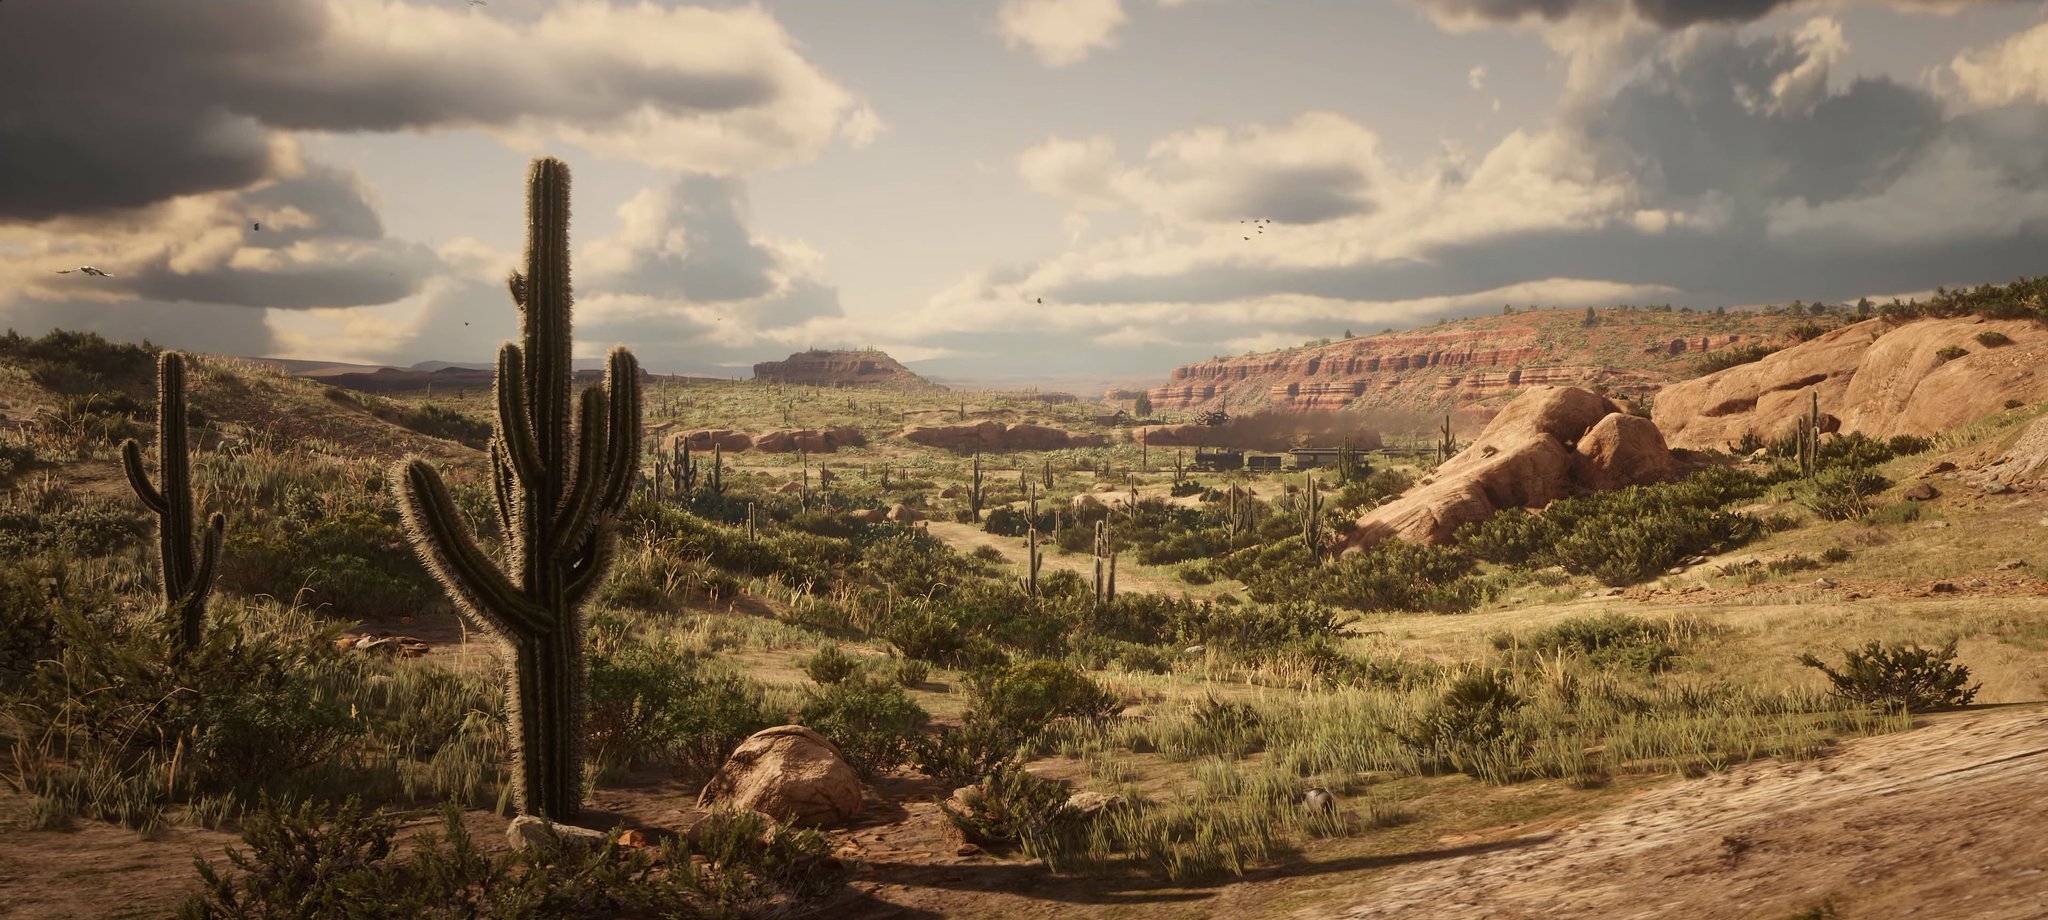 Watch The New Red Dead Redemption 2 Pc Trailer With All New 4k Screenshots Rockstarintel